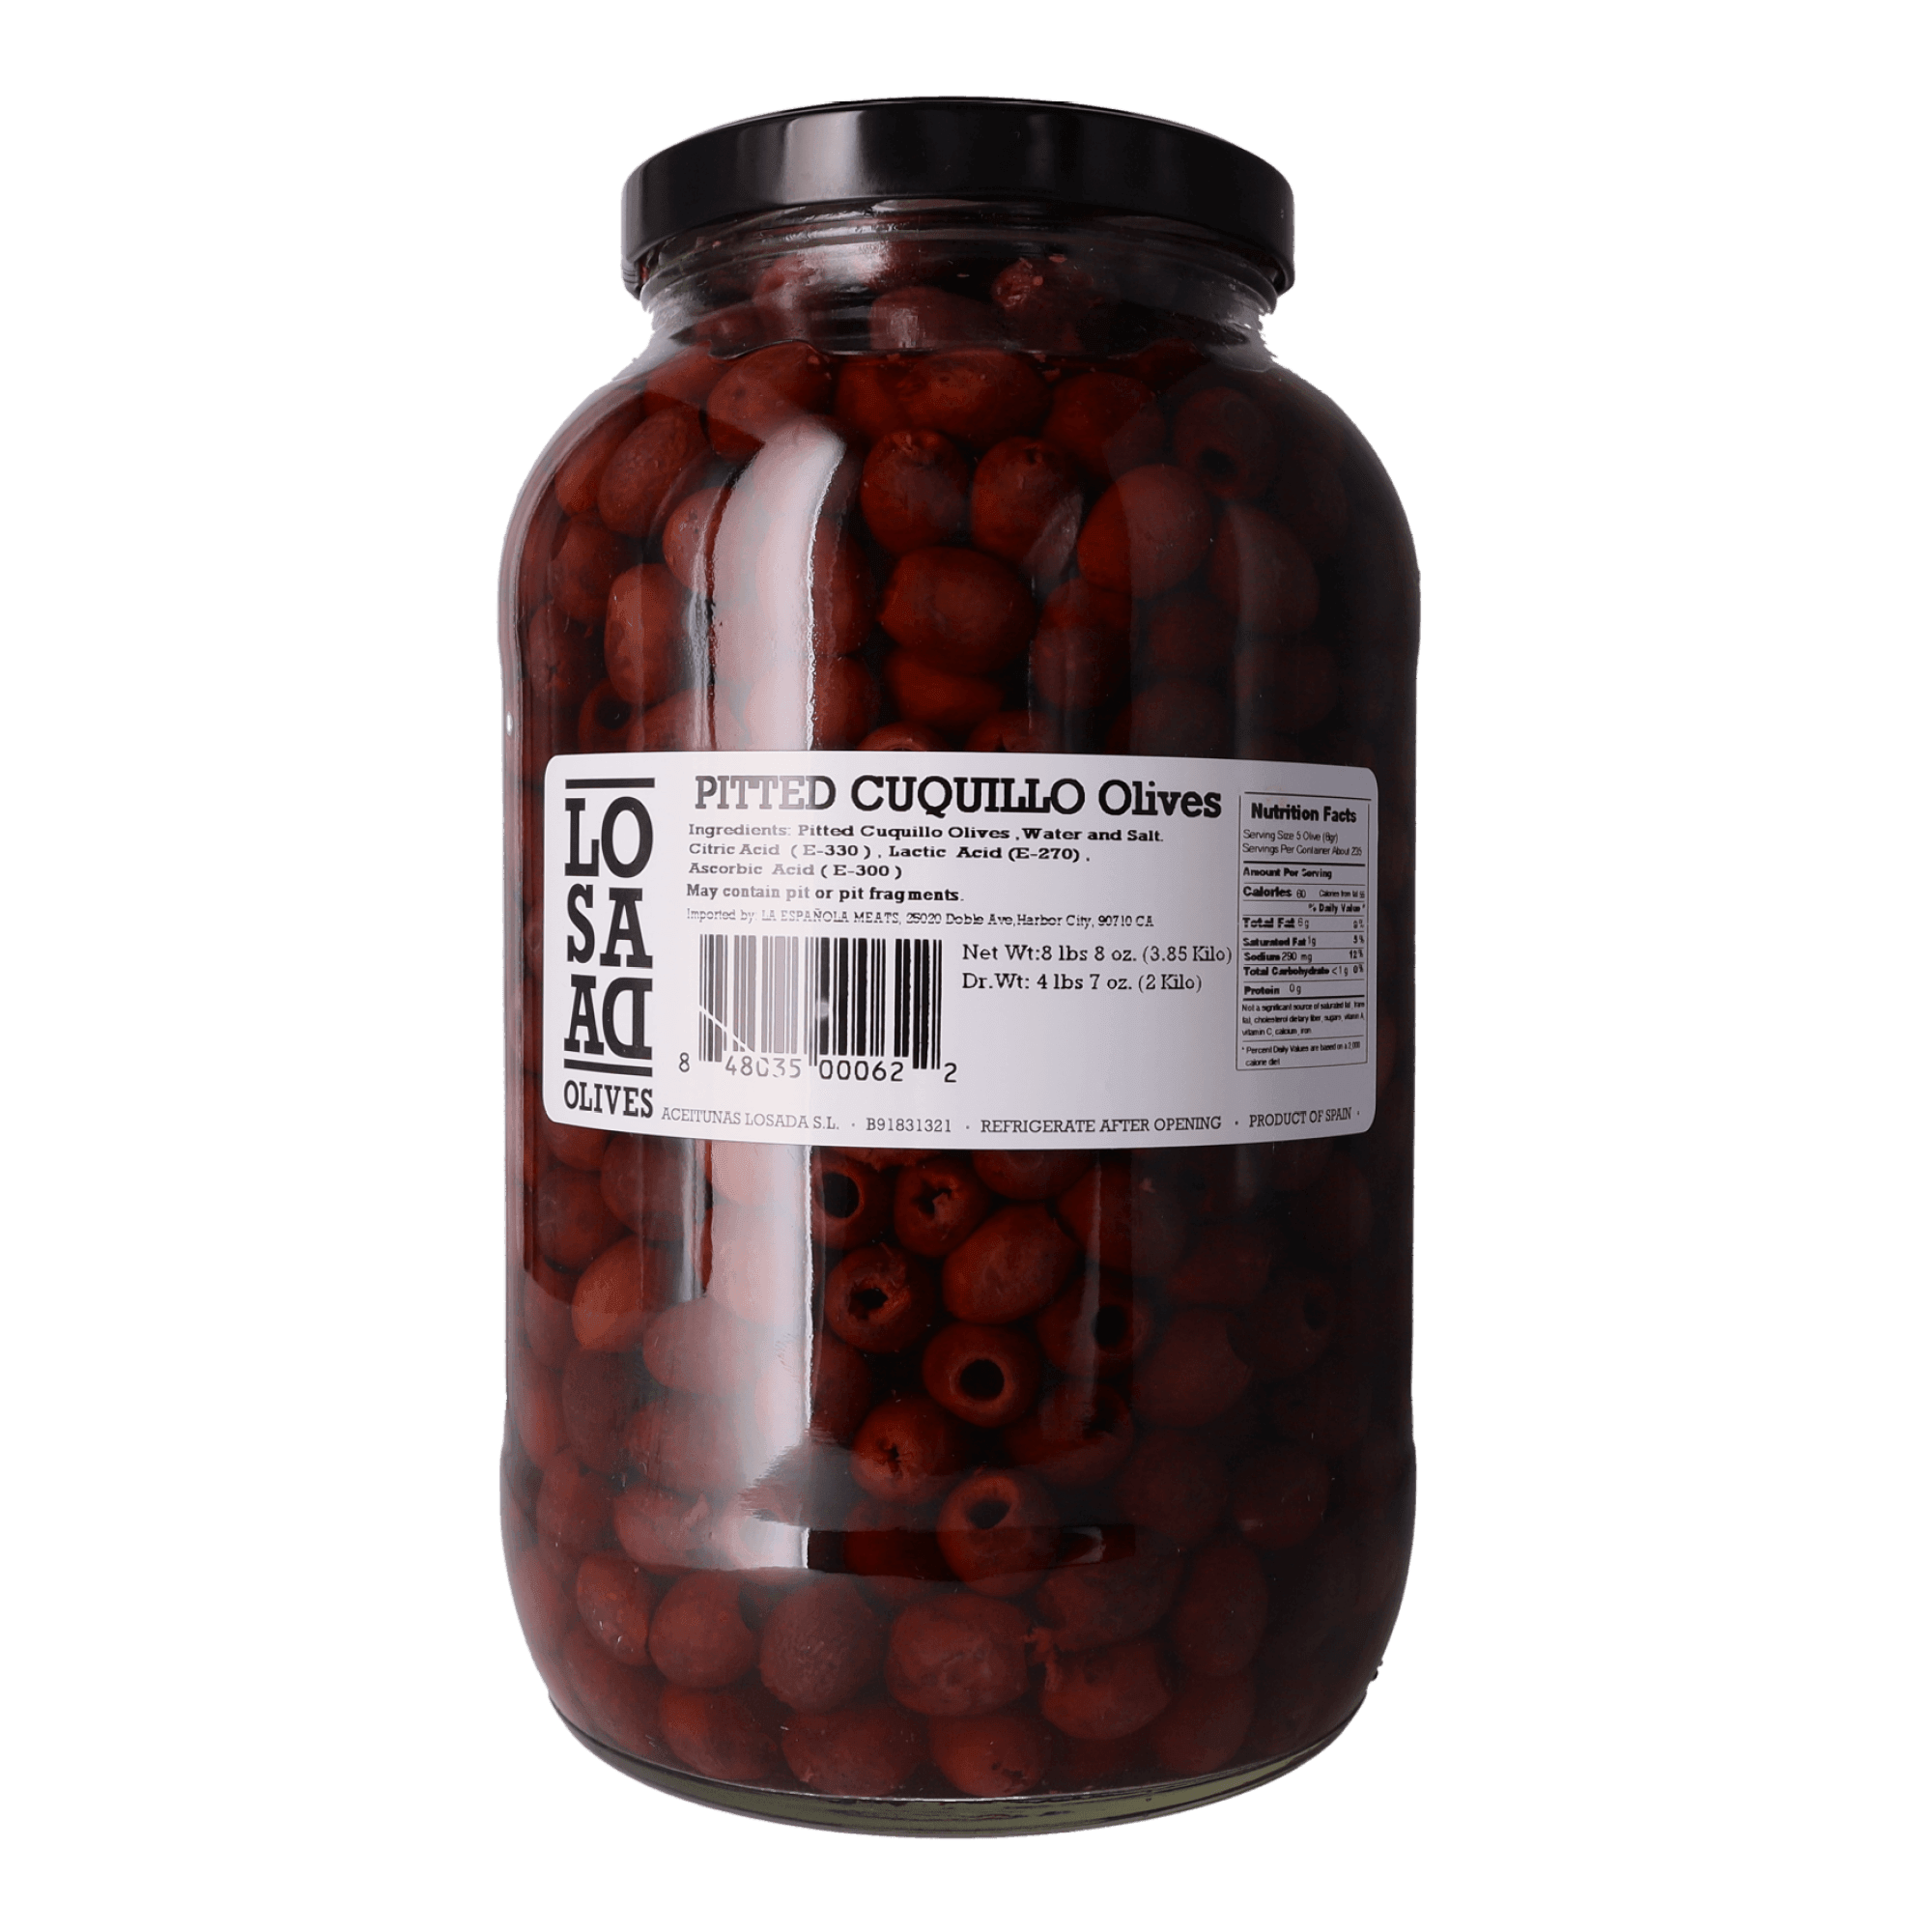 Cuquillo Olives Pitted - Savory Gourmet